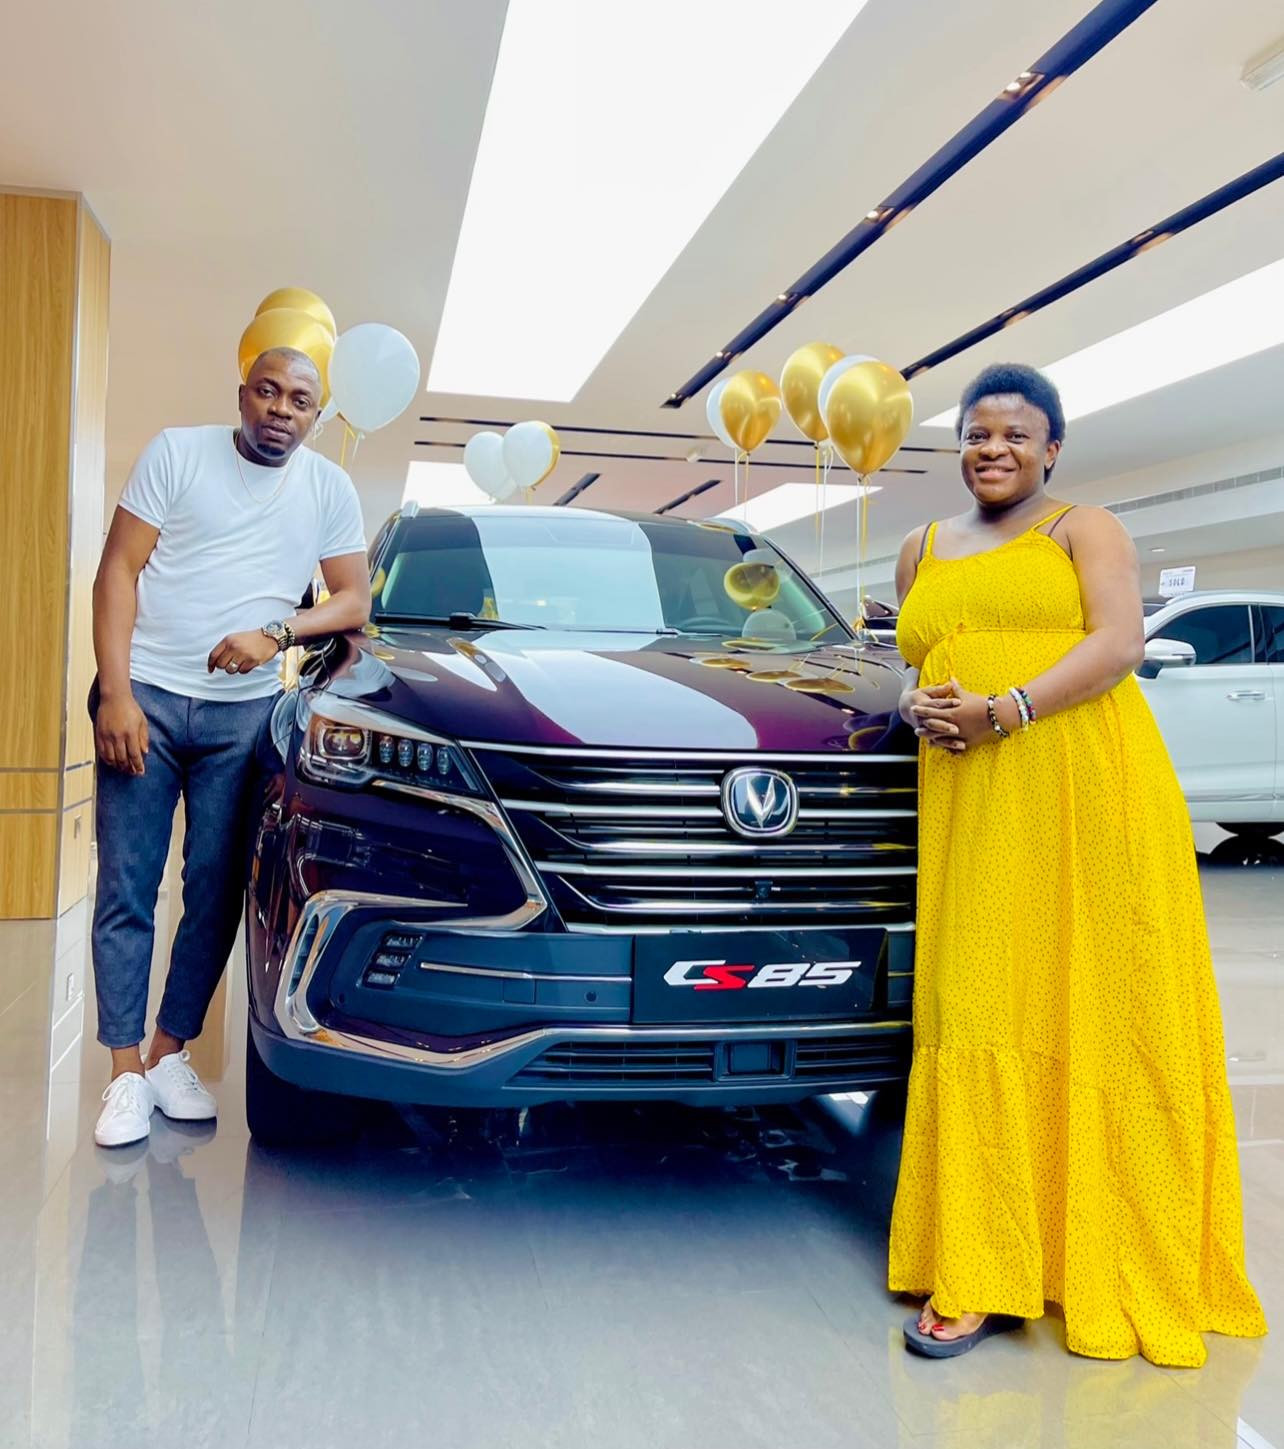 Sex therapist, Angela Nwosu, receives a brand new SUV from her husband as push present